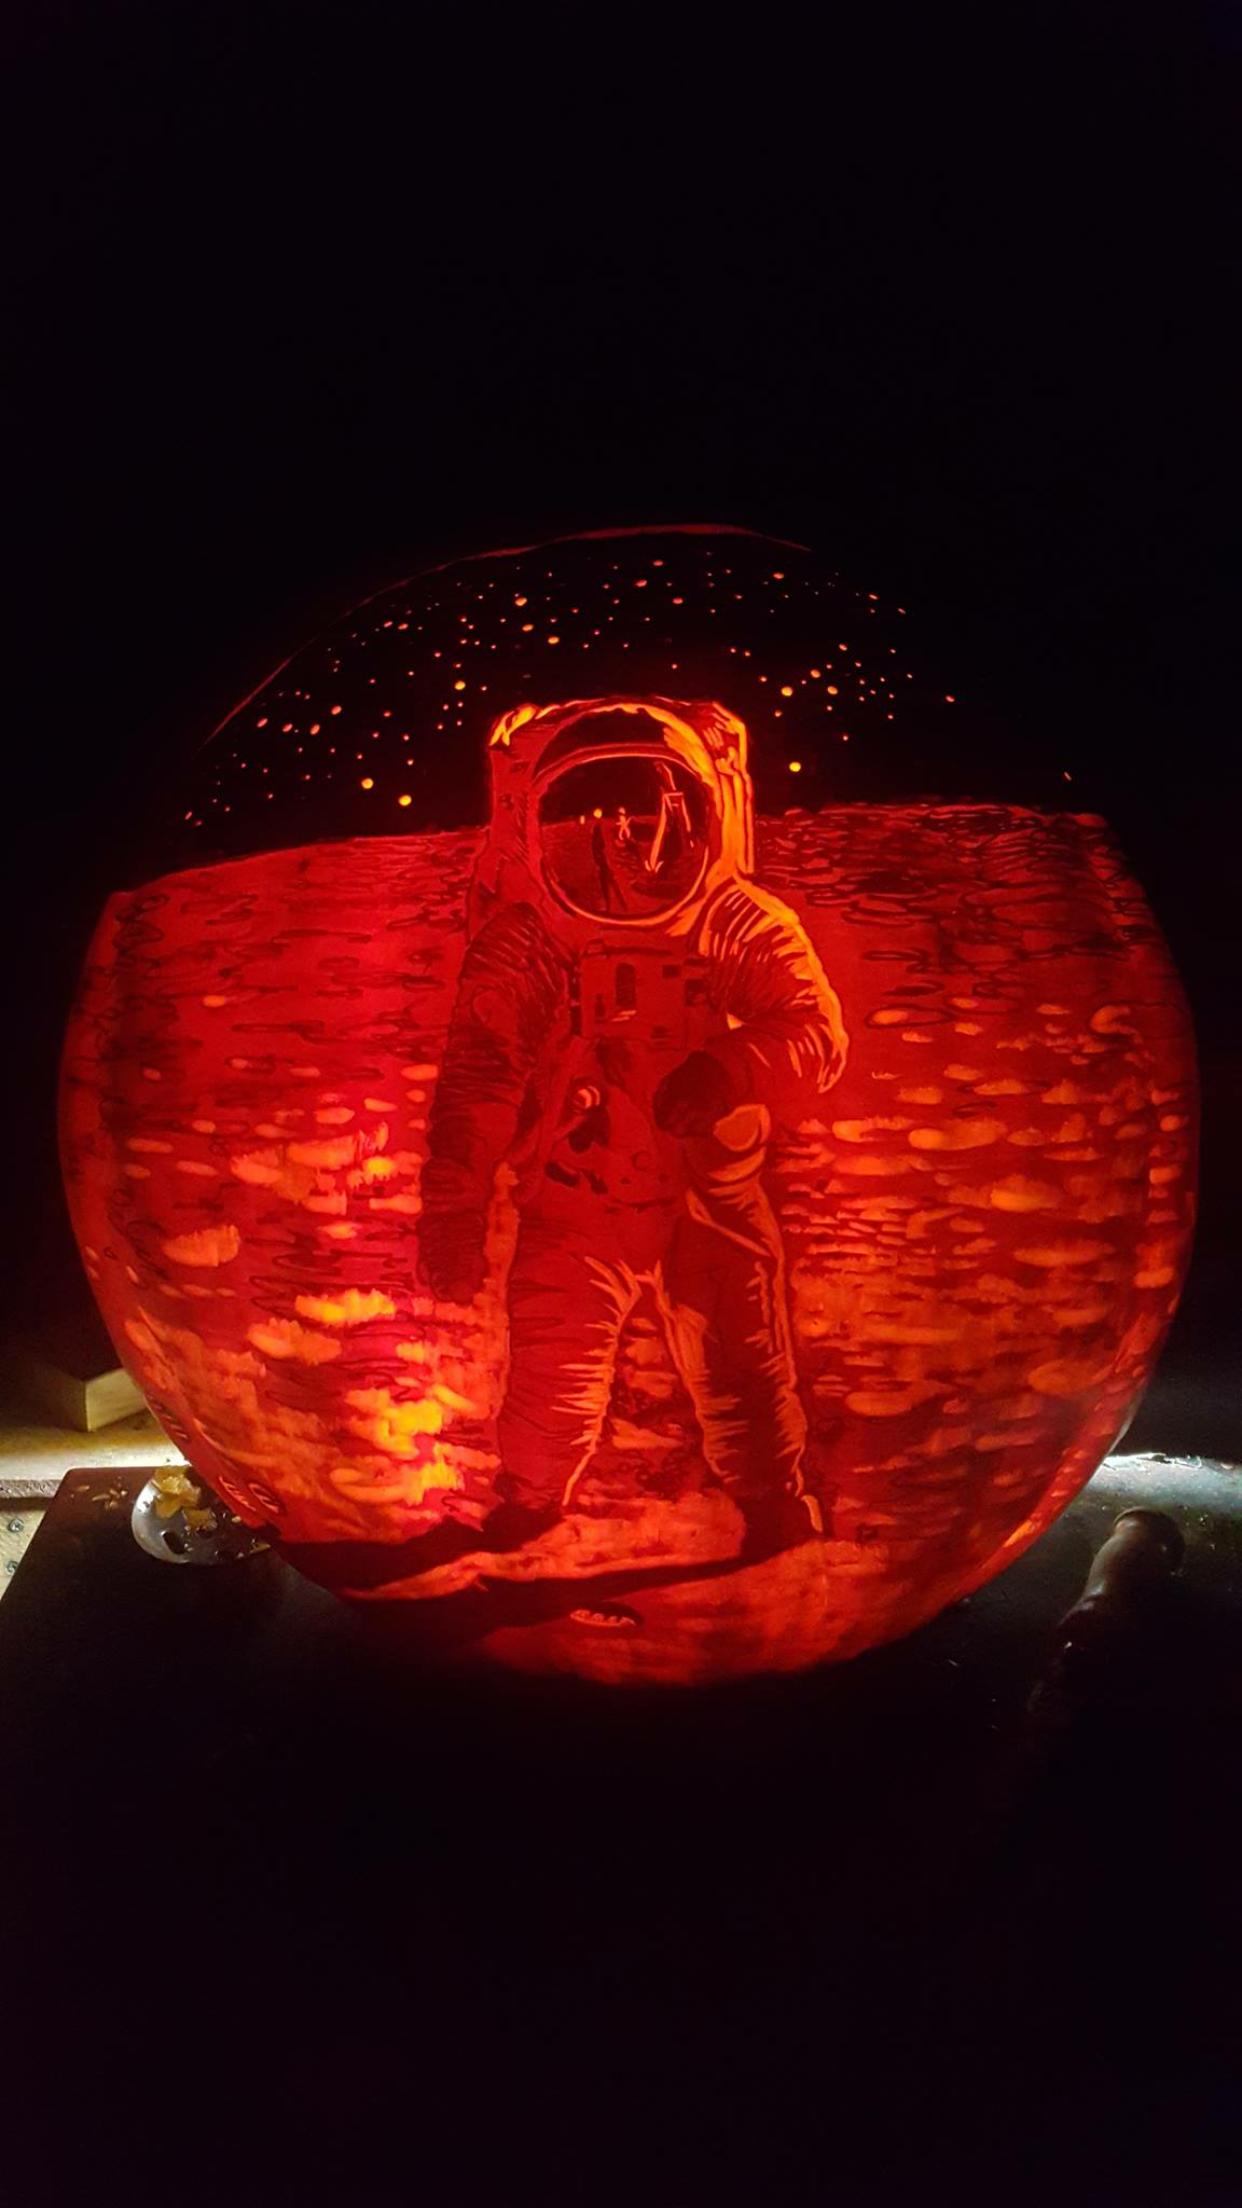 carved pumpkin made to look like an astronaut walking on the moon